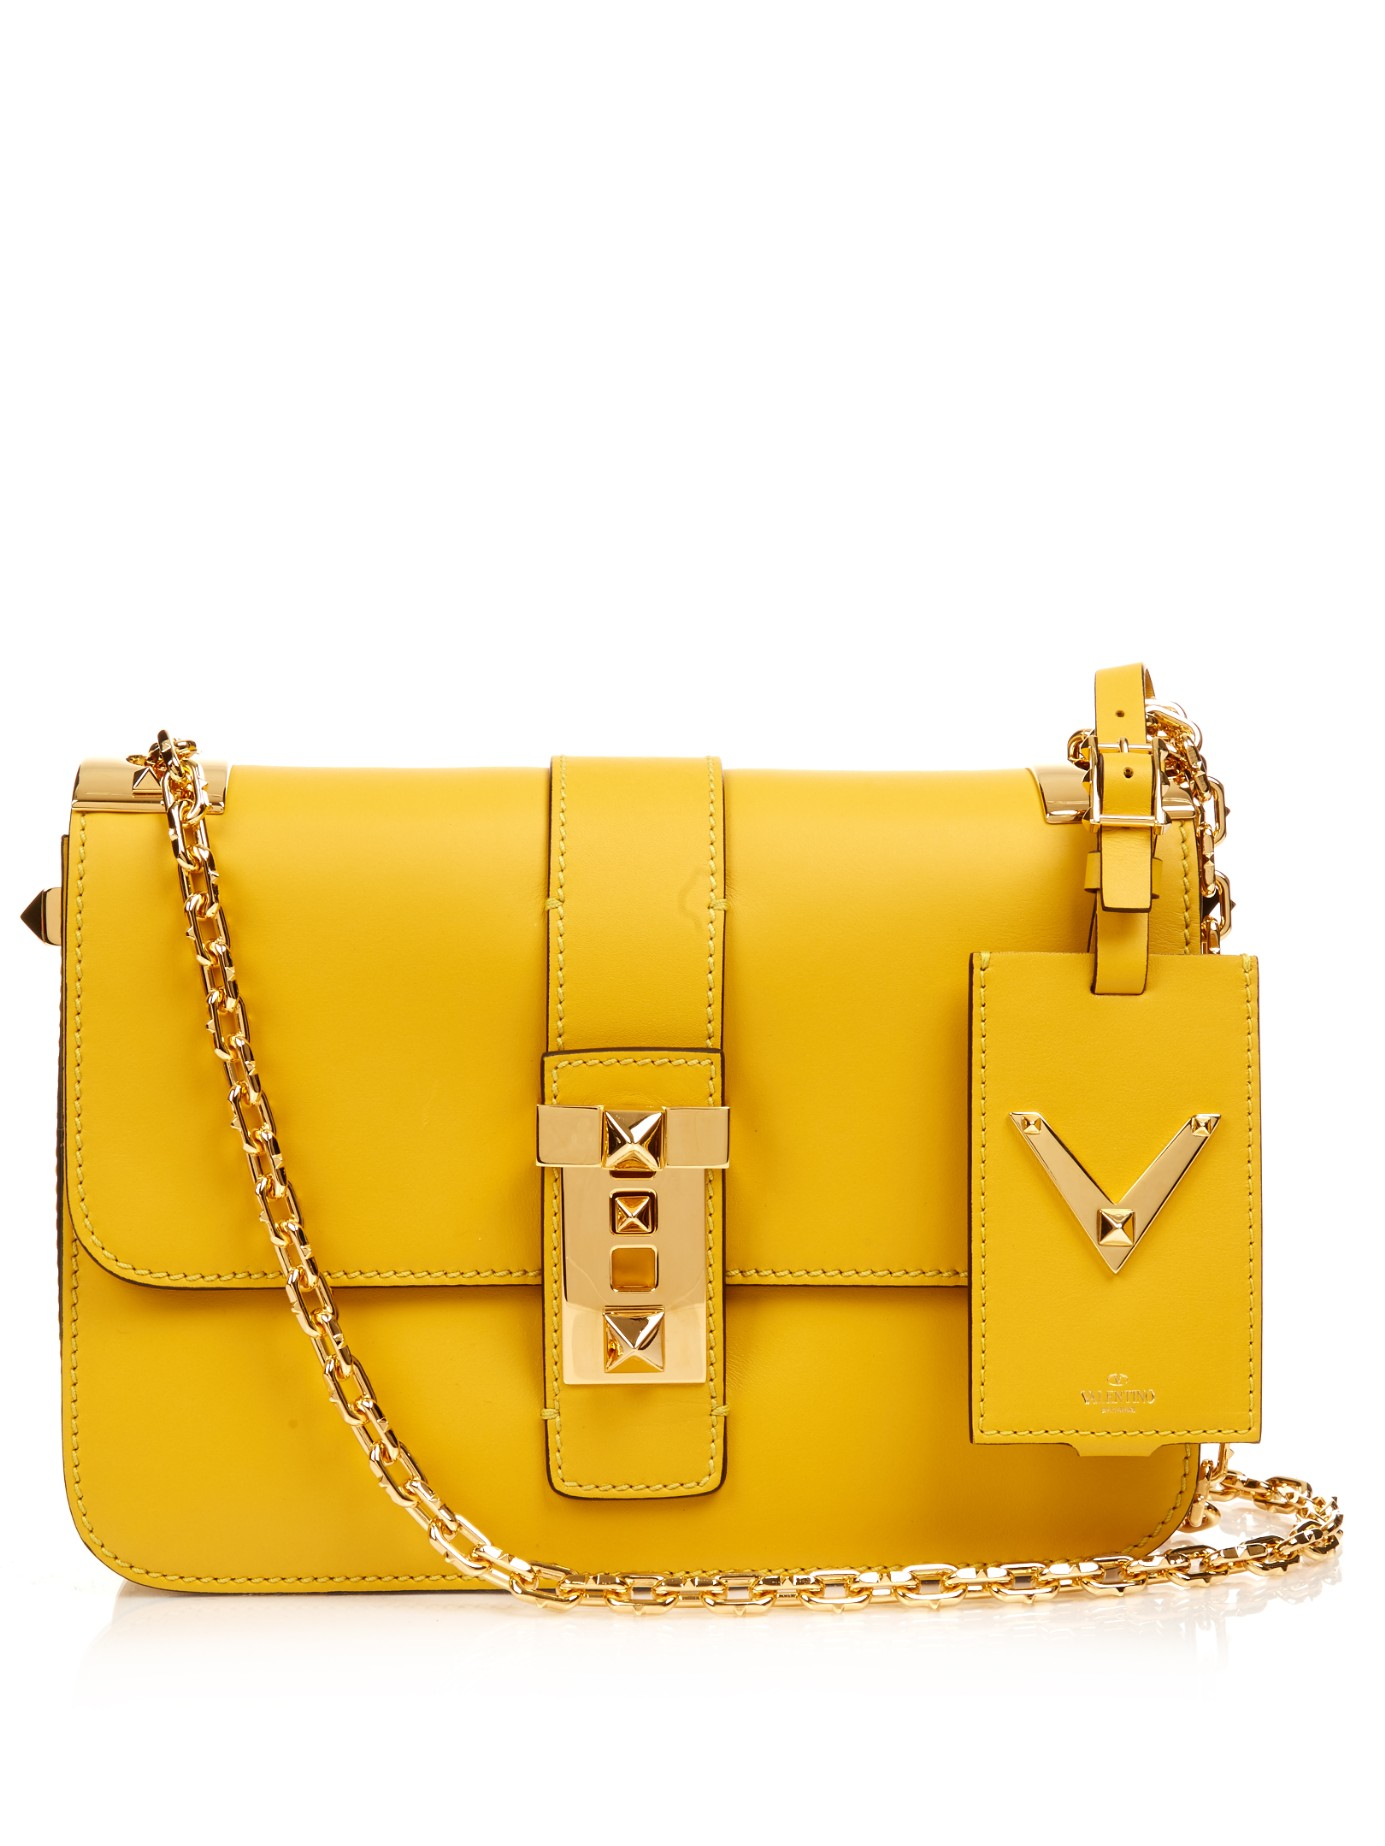 Lyst - Valentino B-Rockstud Leather Shoulder Bag in Yellow